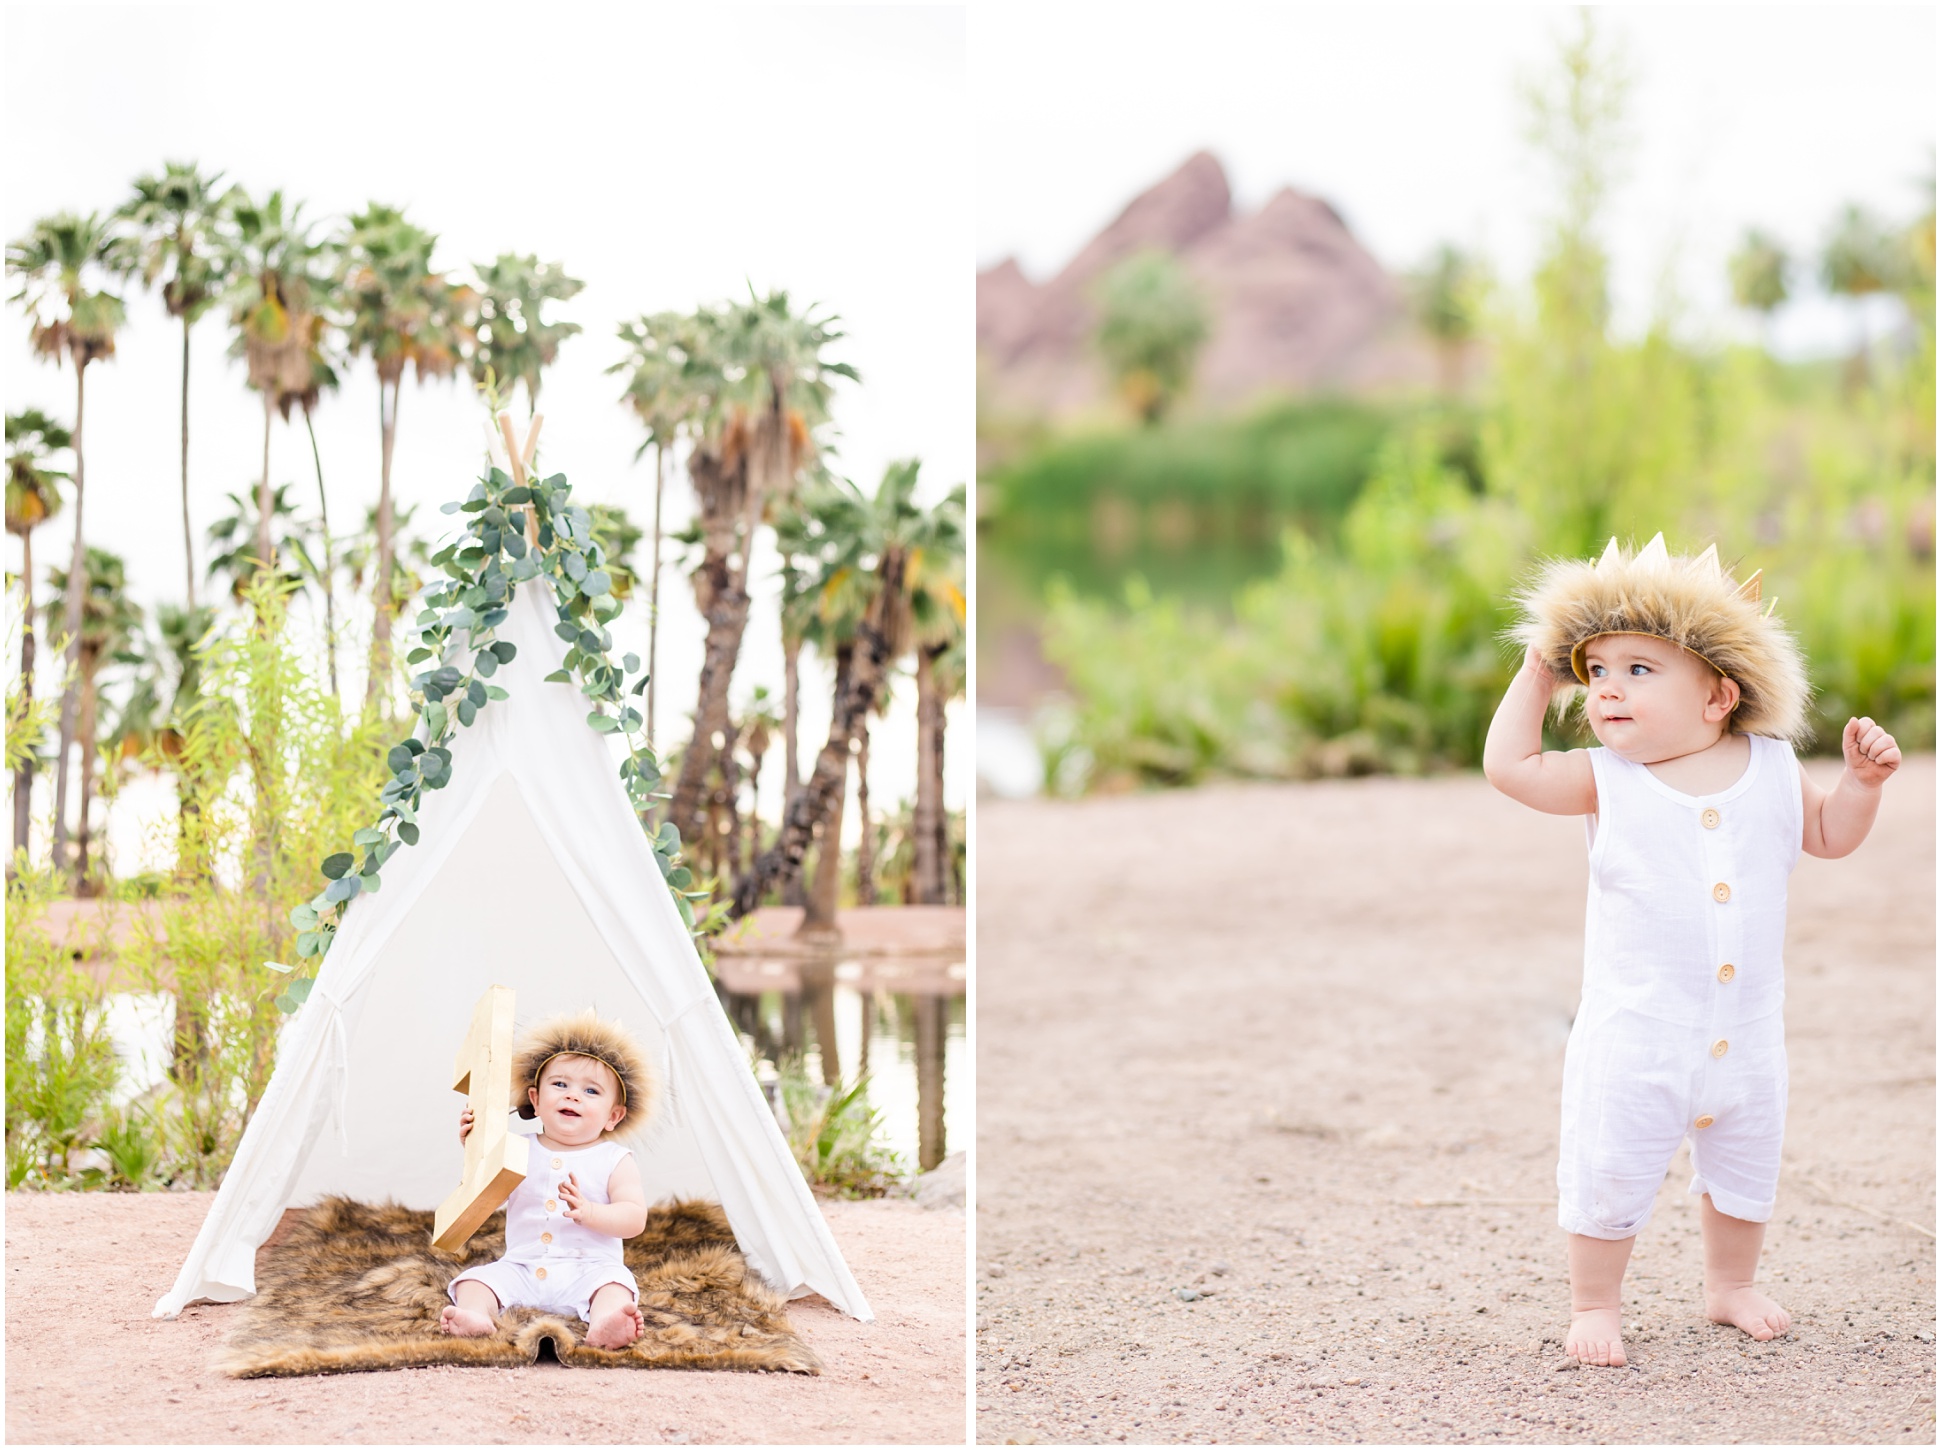 Left: Wild Things Theme First Birthday Photo; Right: Karsyn wearing his where the wild things are crown